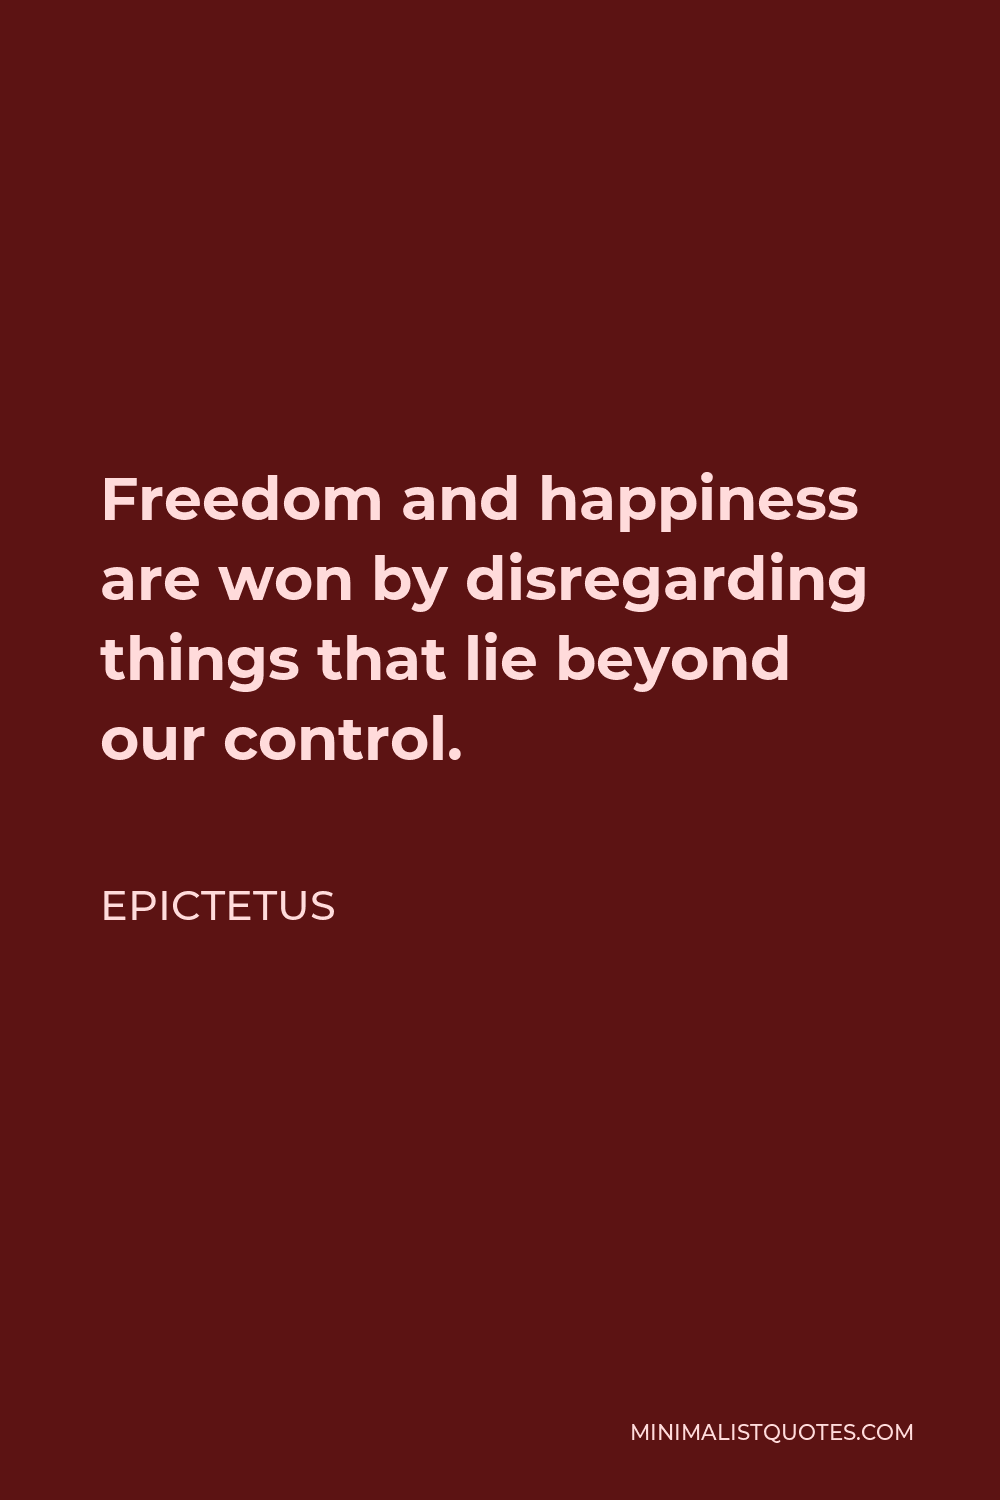 Epictetus Quote - Freedom and happiness are won by disregarding things that lie beyond our control.